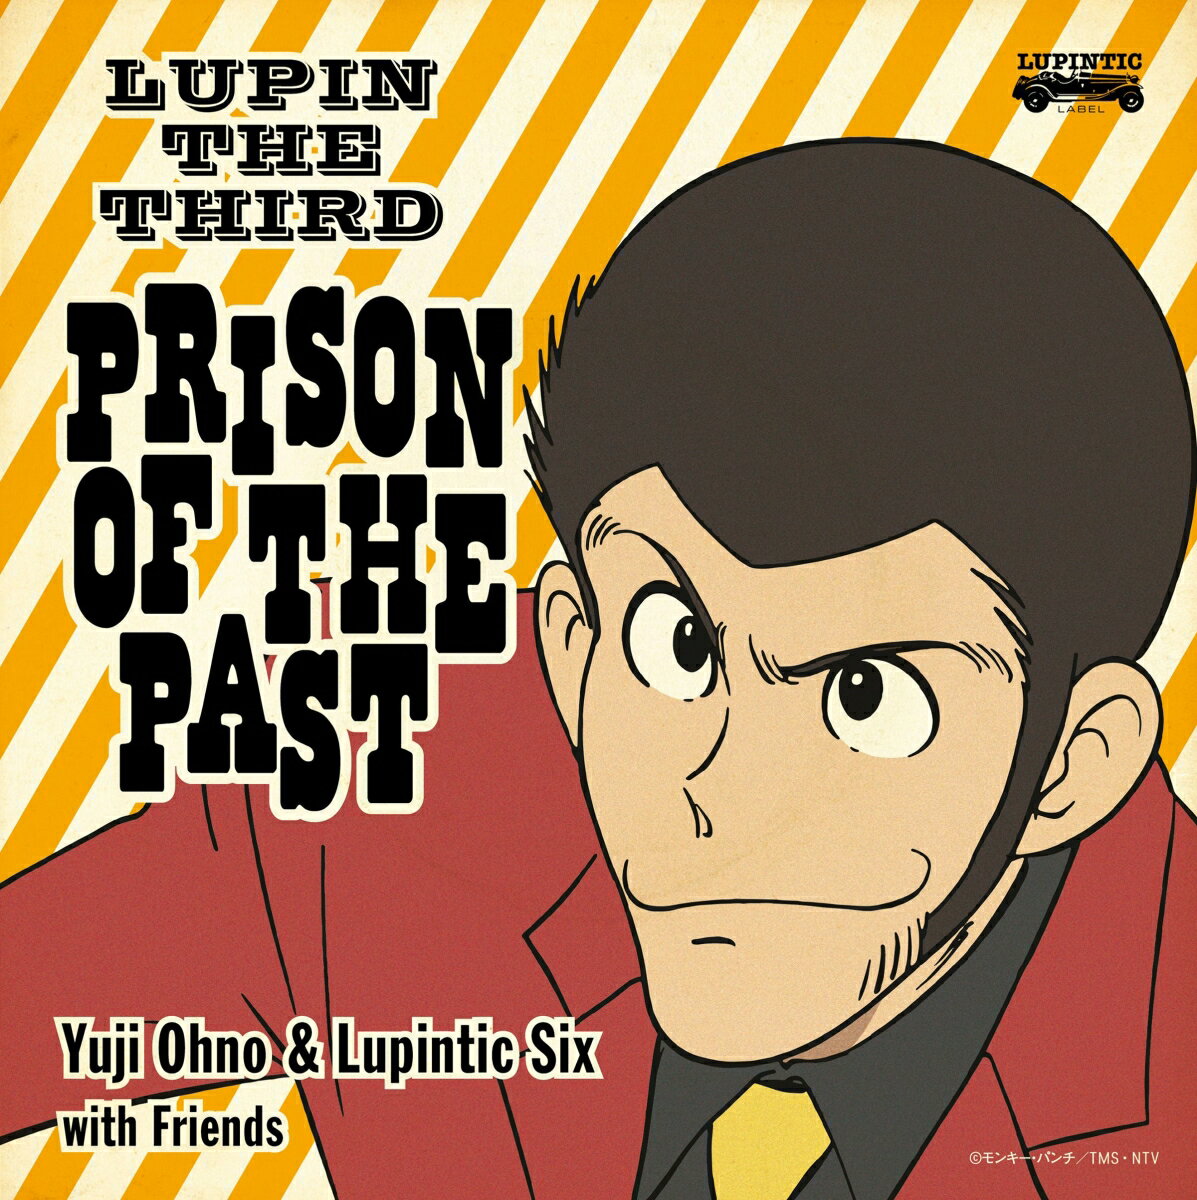 LUPIN THE THIRD 〜PRISON OF THE PAST〜 (Blu-spec 2CD)